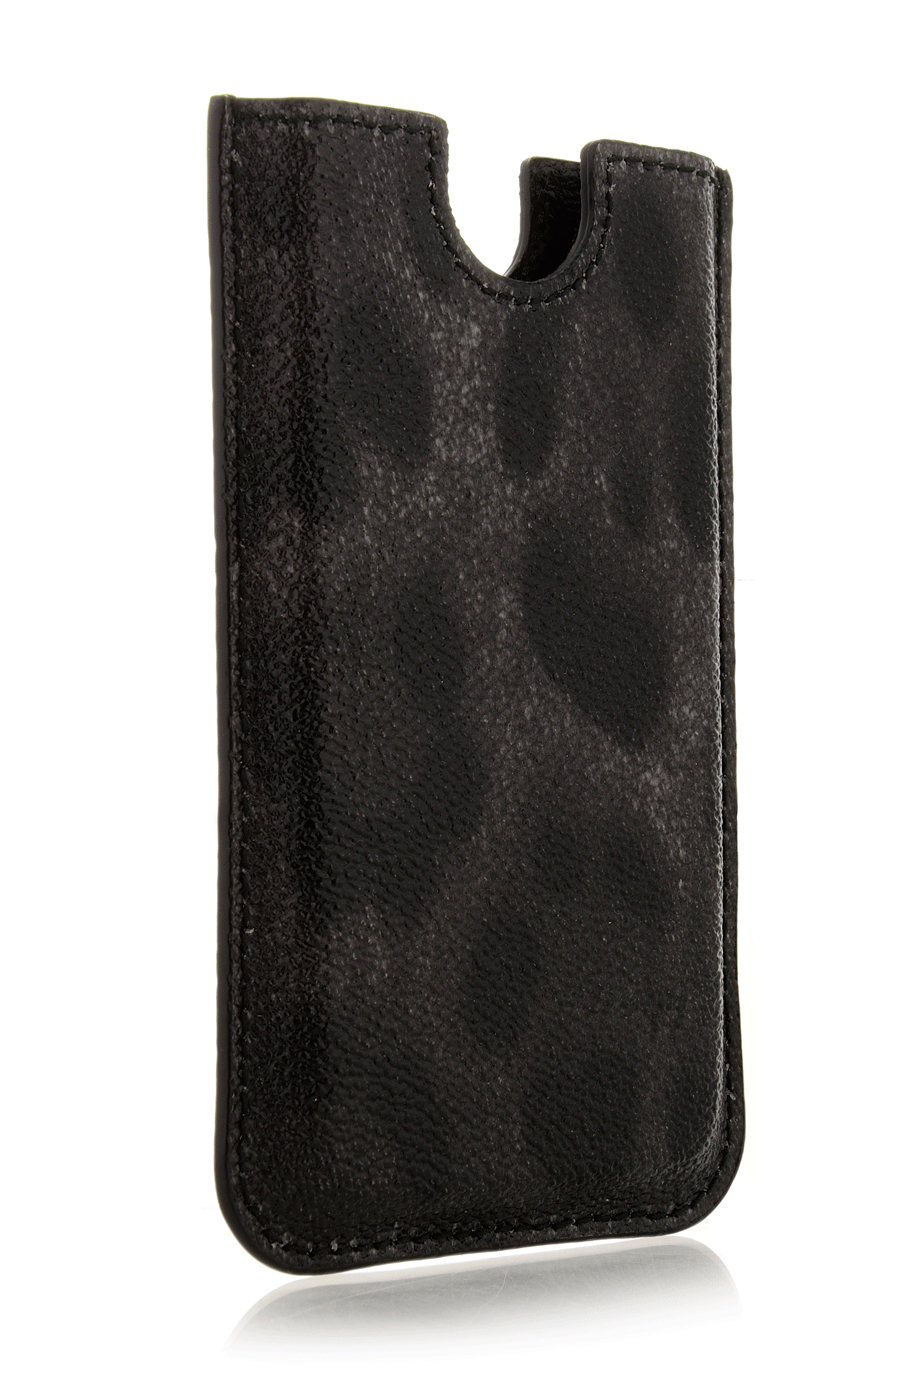 LEOPARD Gray iPhone Mobile Case